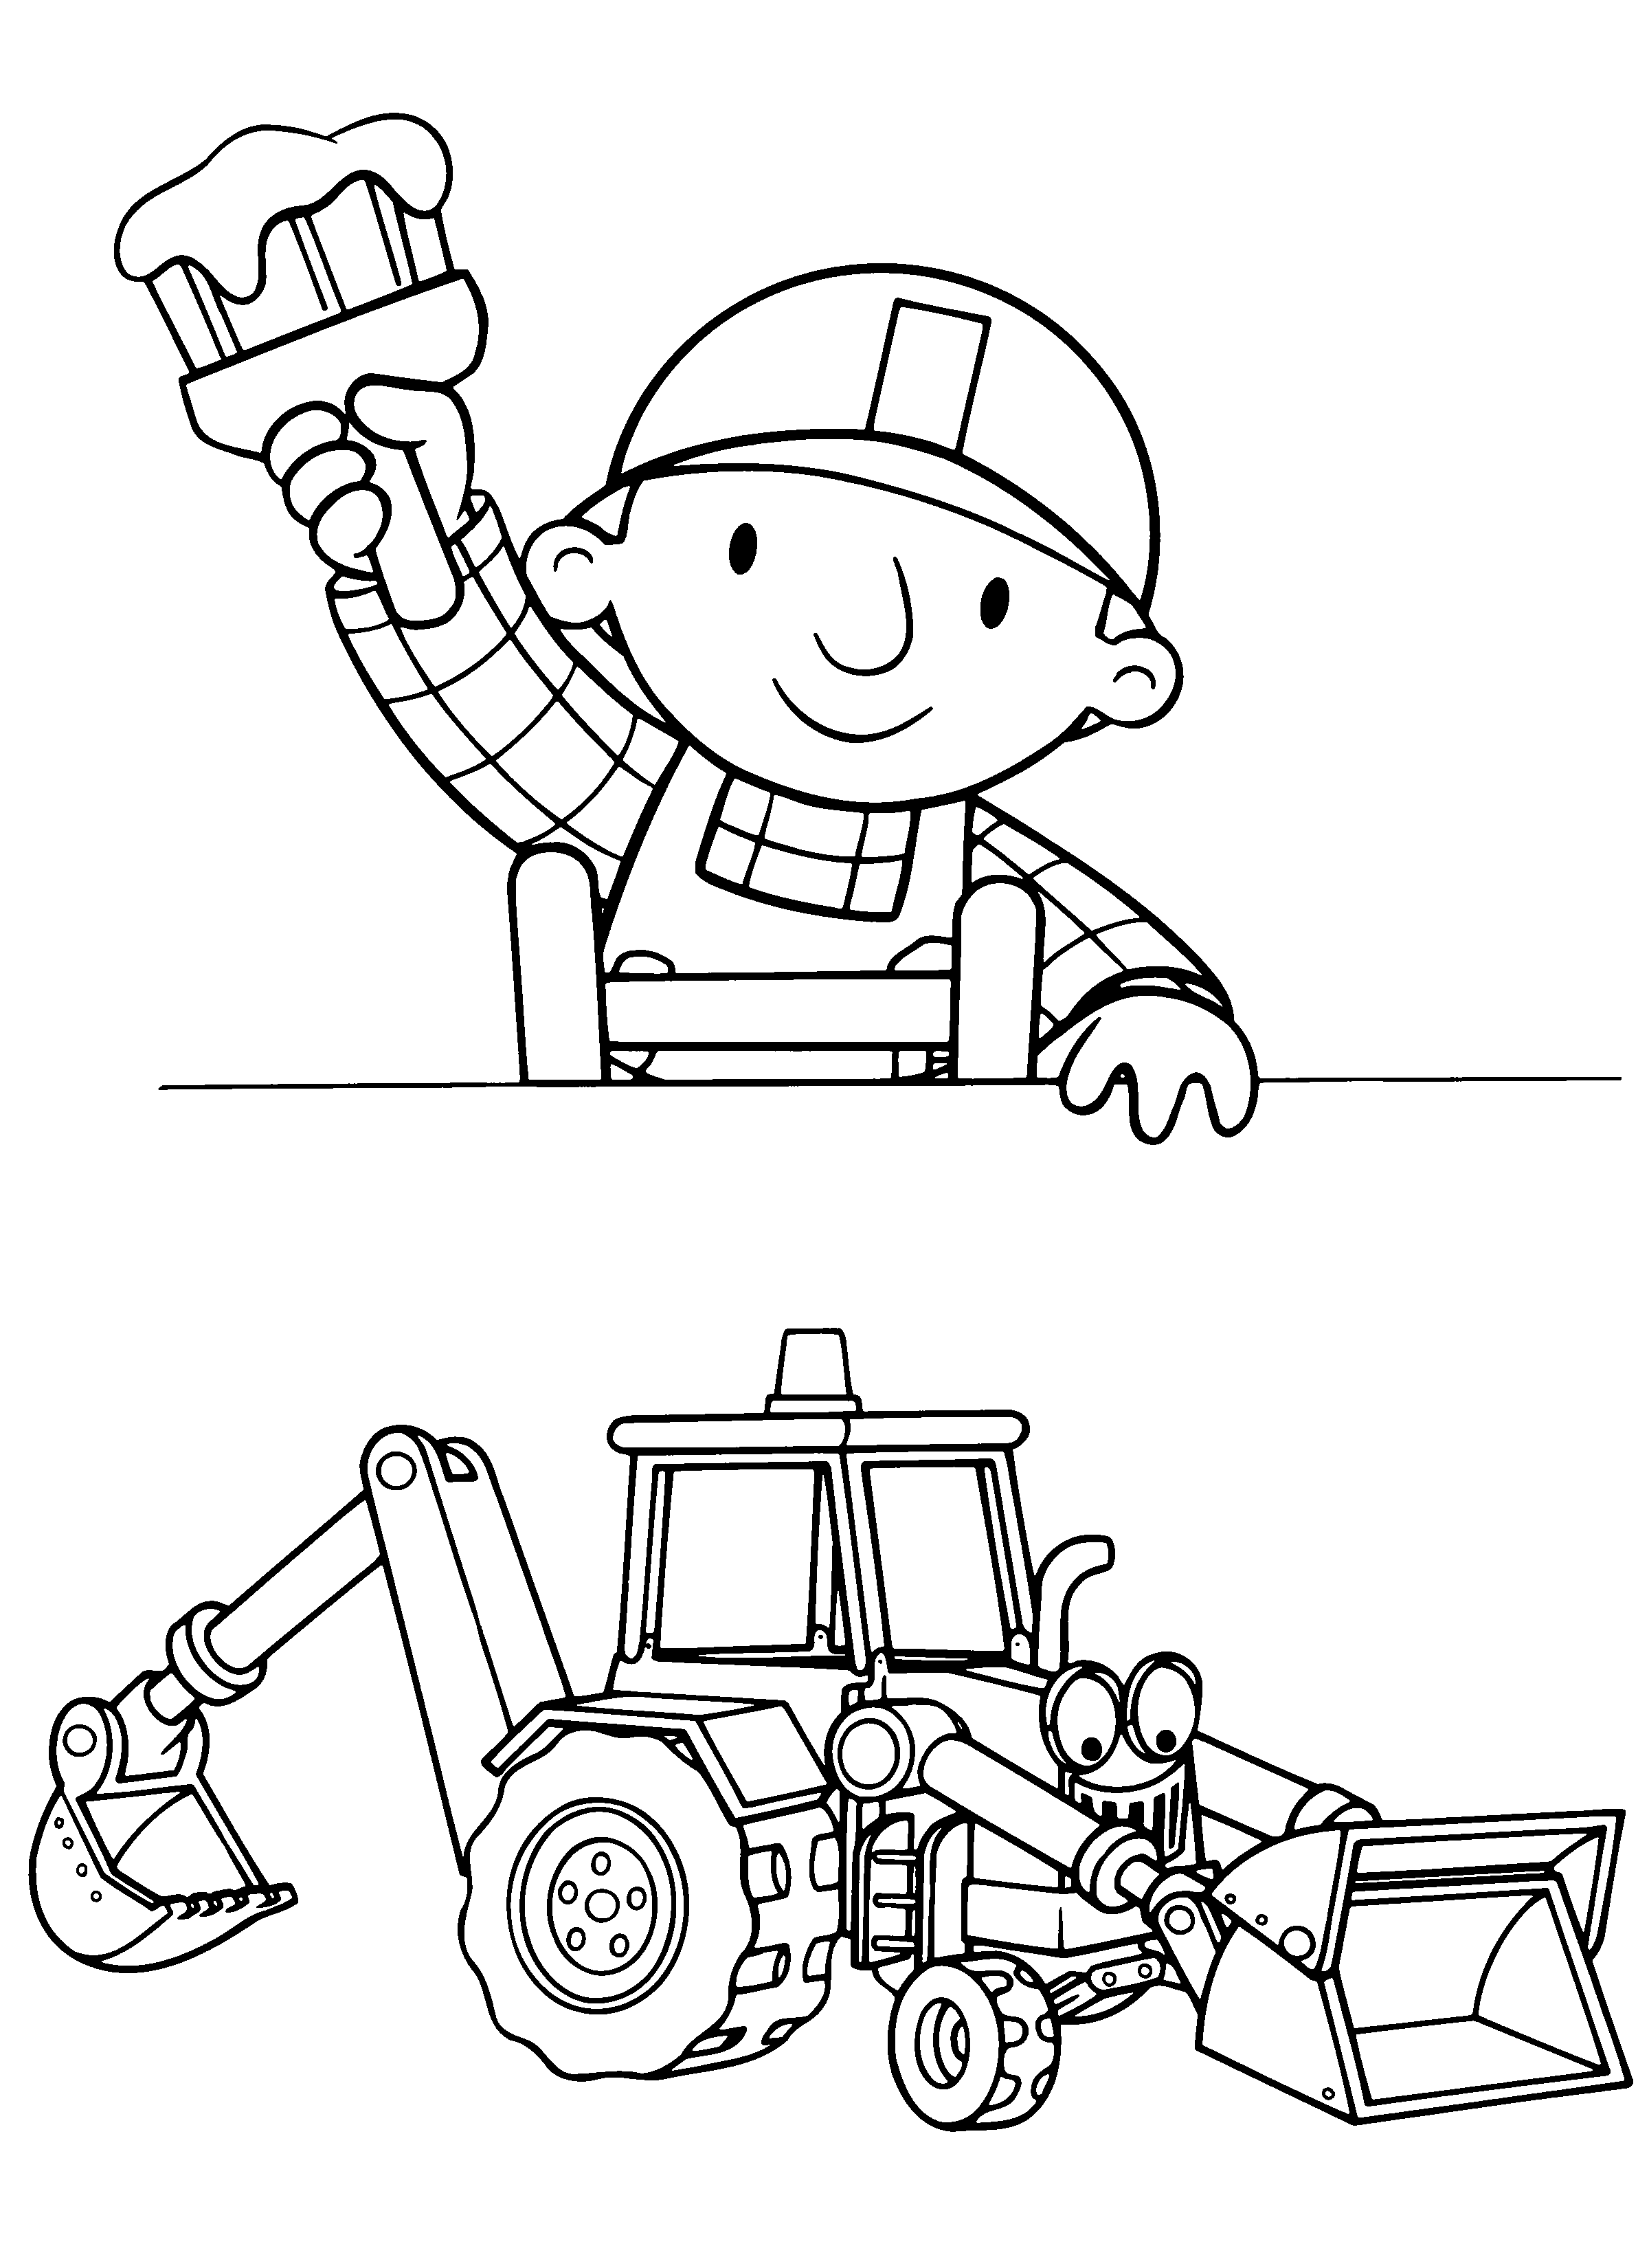 bob the builder coloring page free printable bob the builder coloring pages for kids bob builder page the coloring 